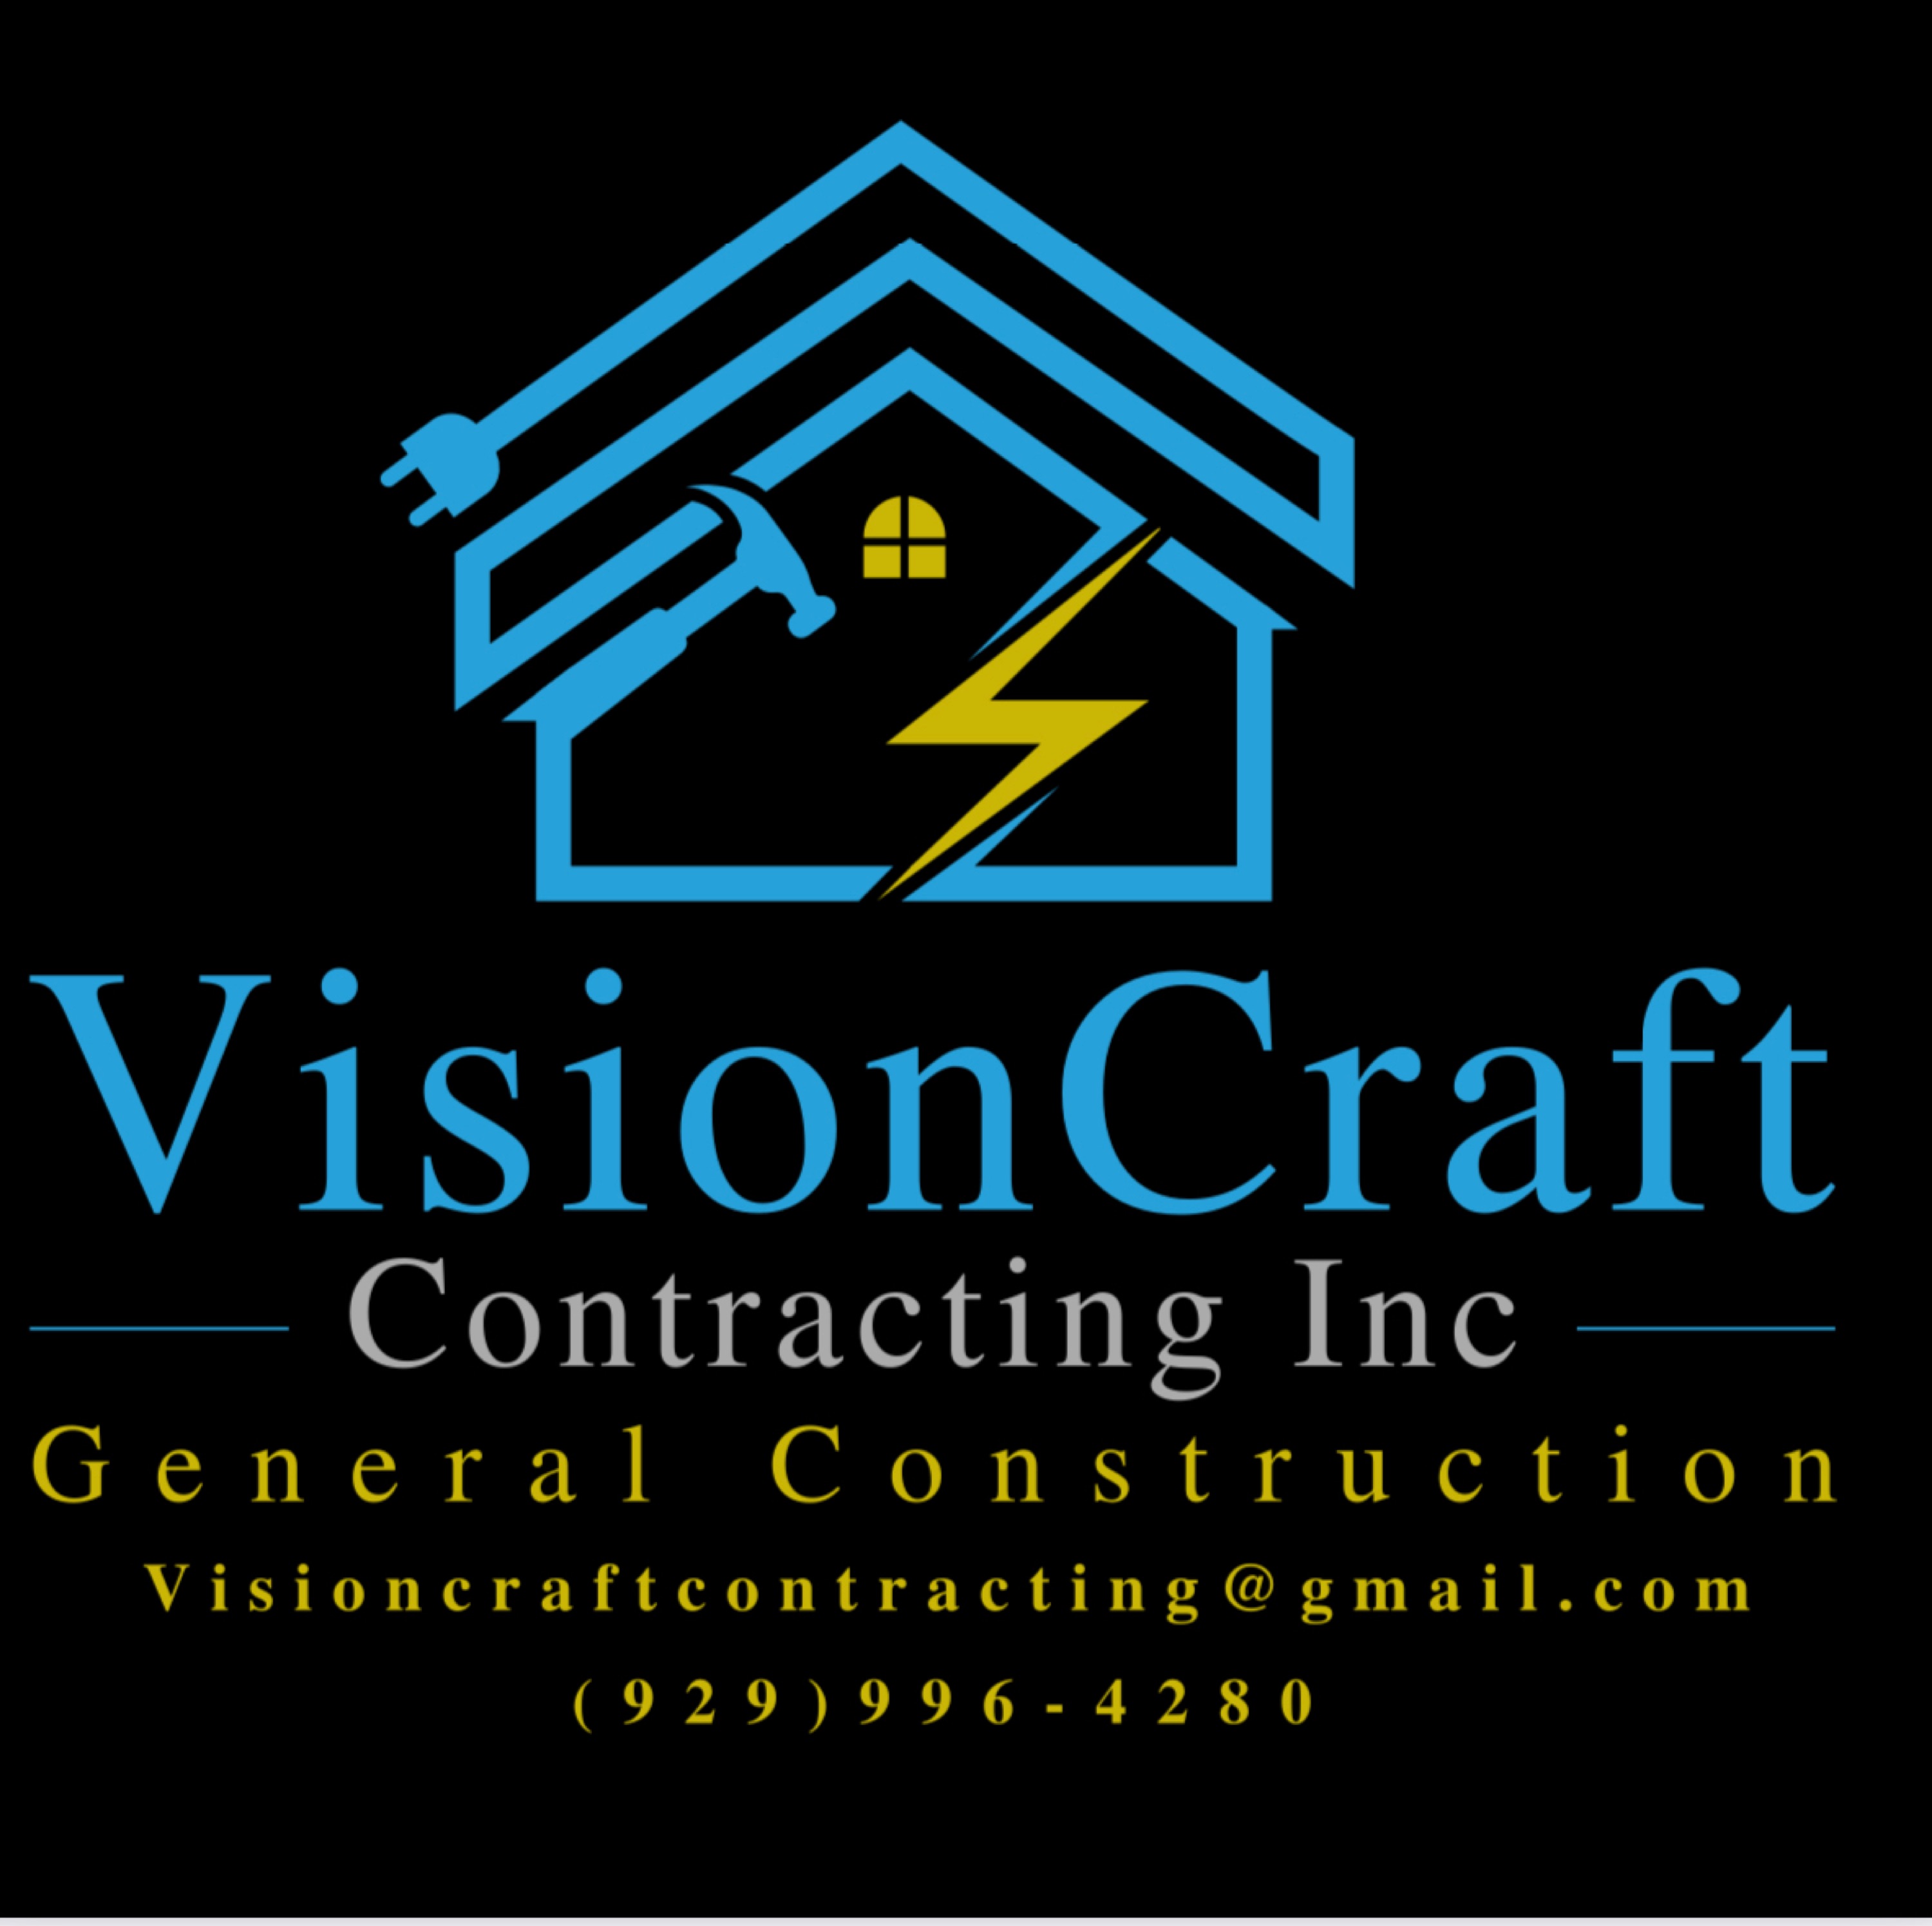 VisionCraft Contracting Inc Logo